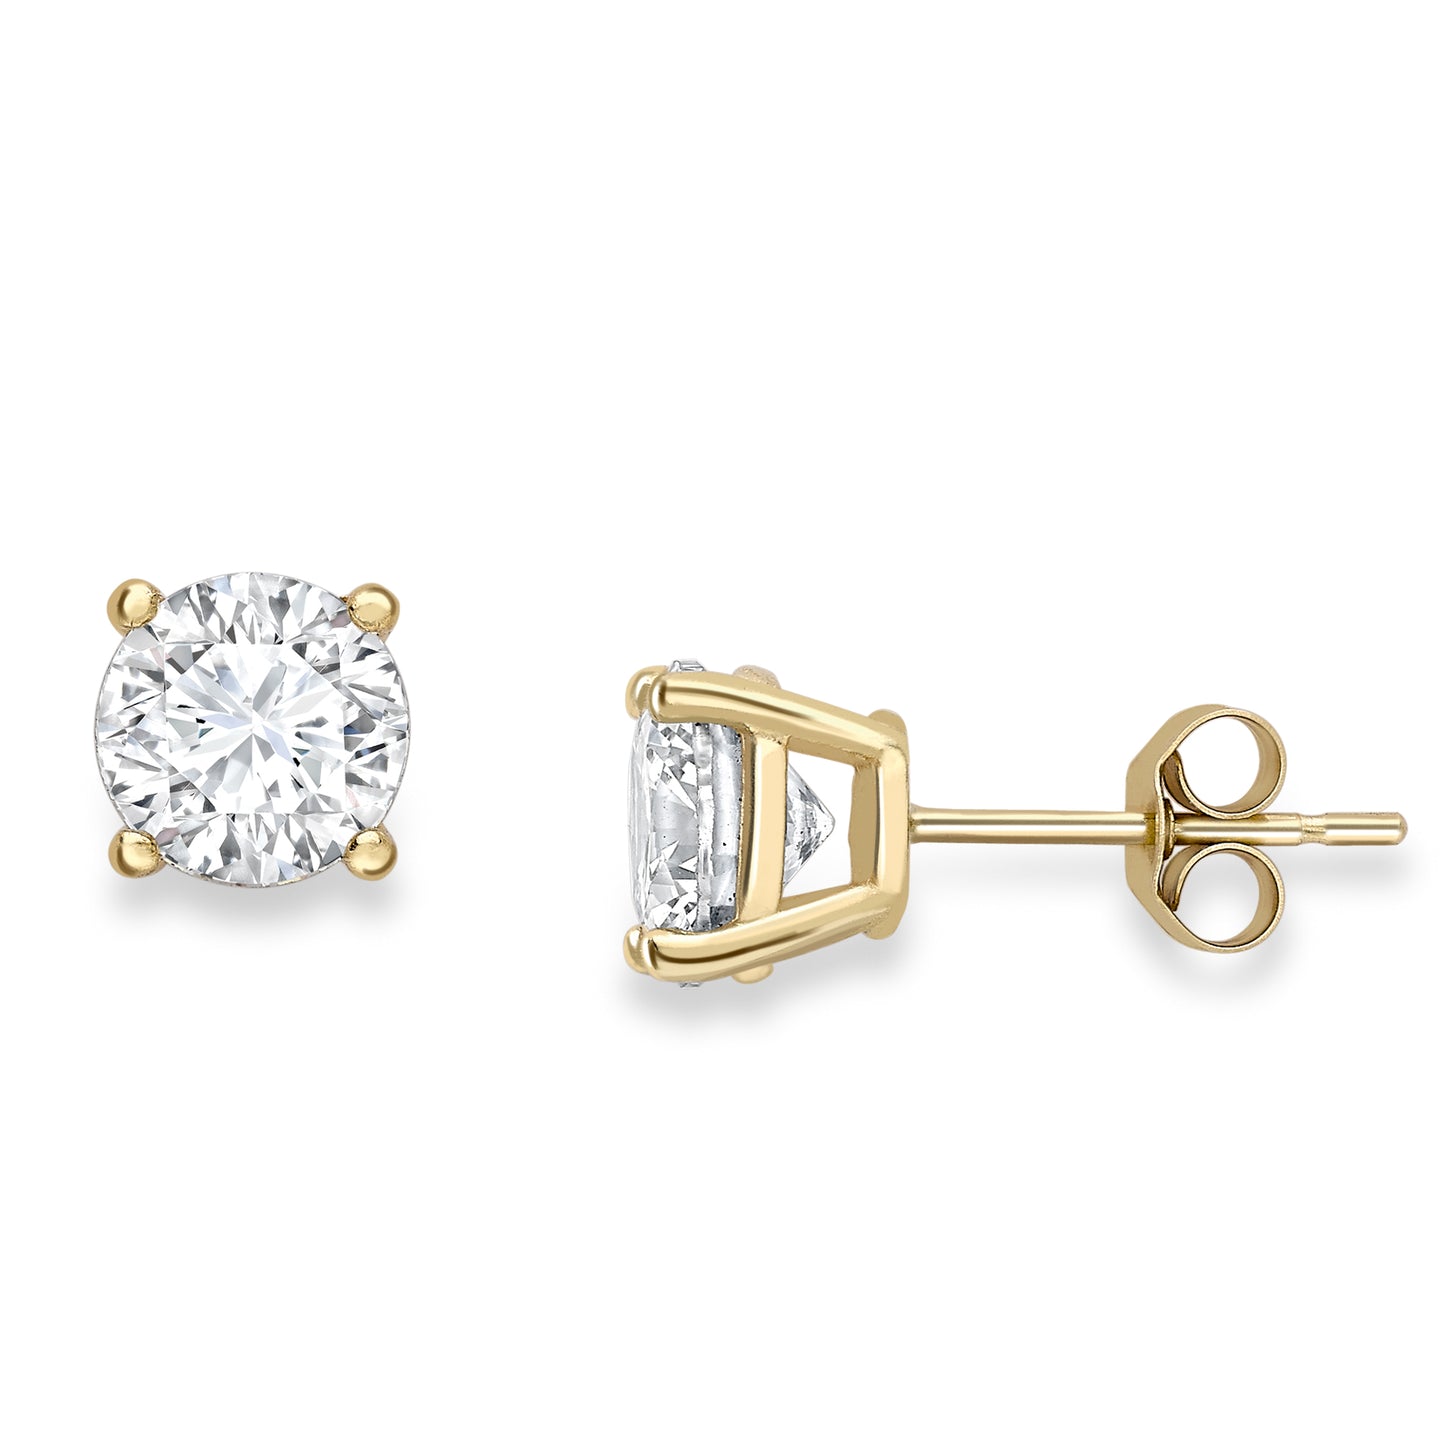 9ct Gold  CZ Simple 4-Claw Solitaire Stud Earrings 5mm - SENR02605